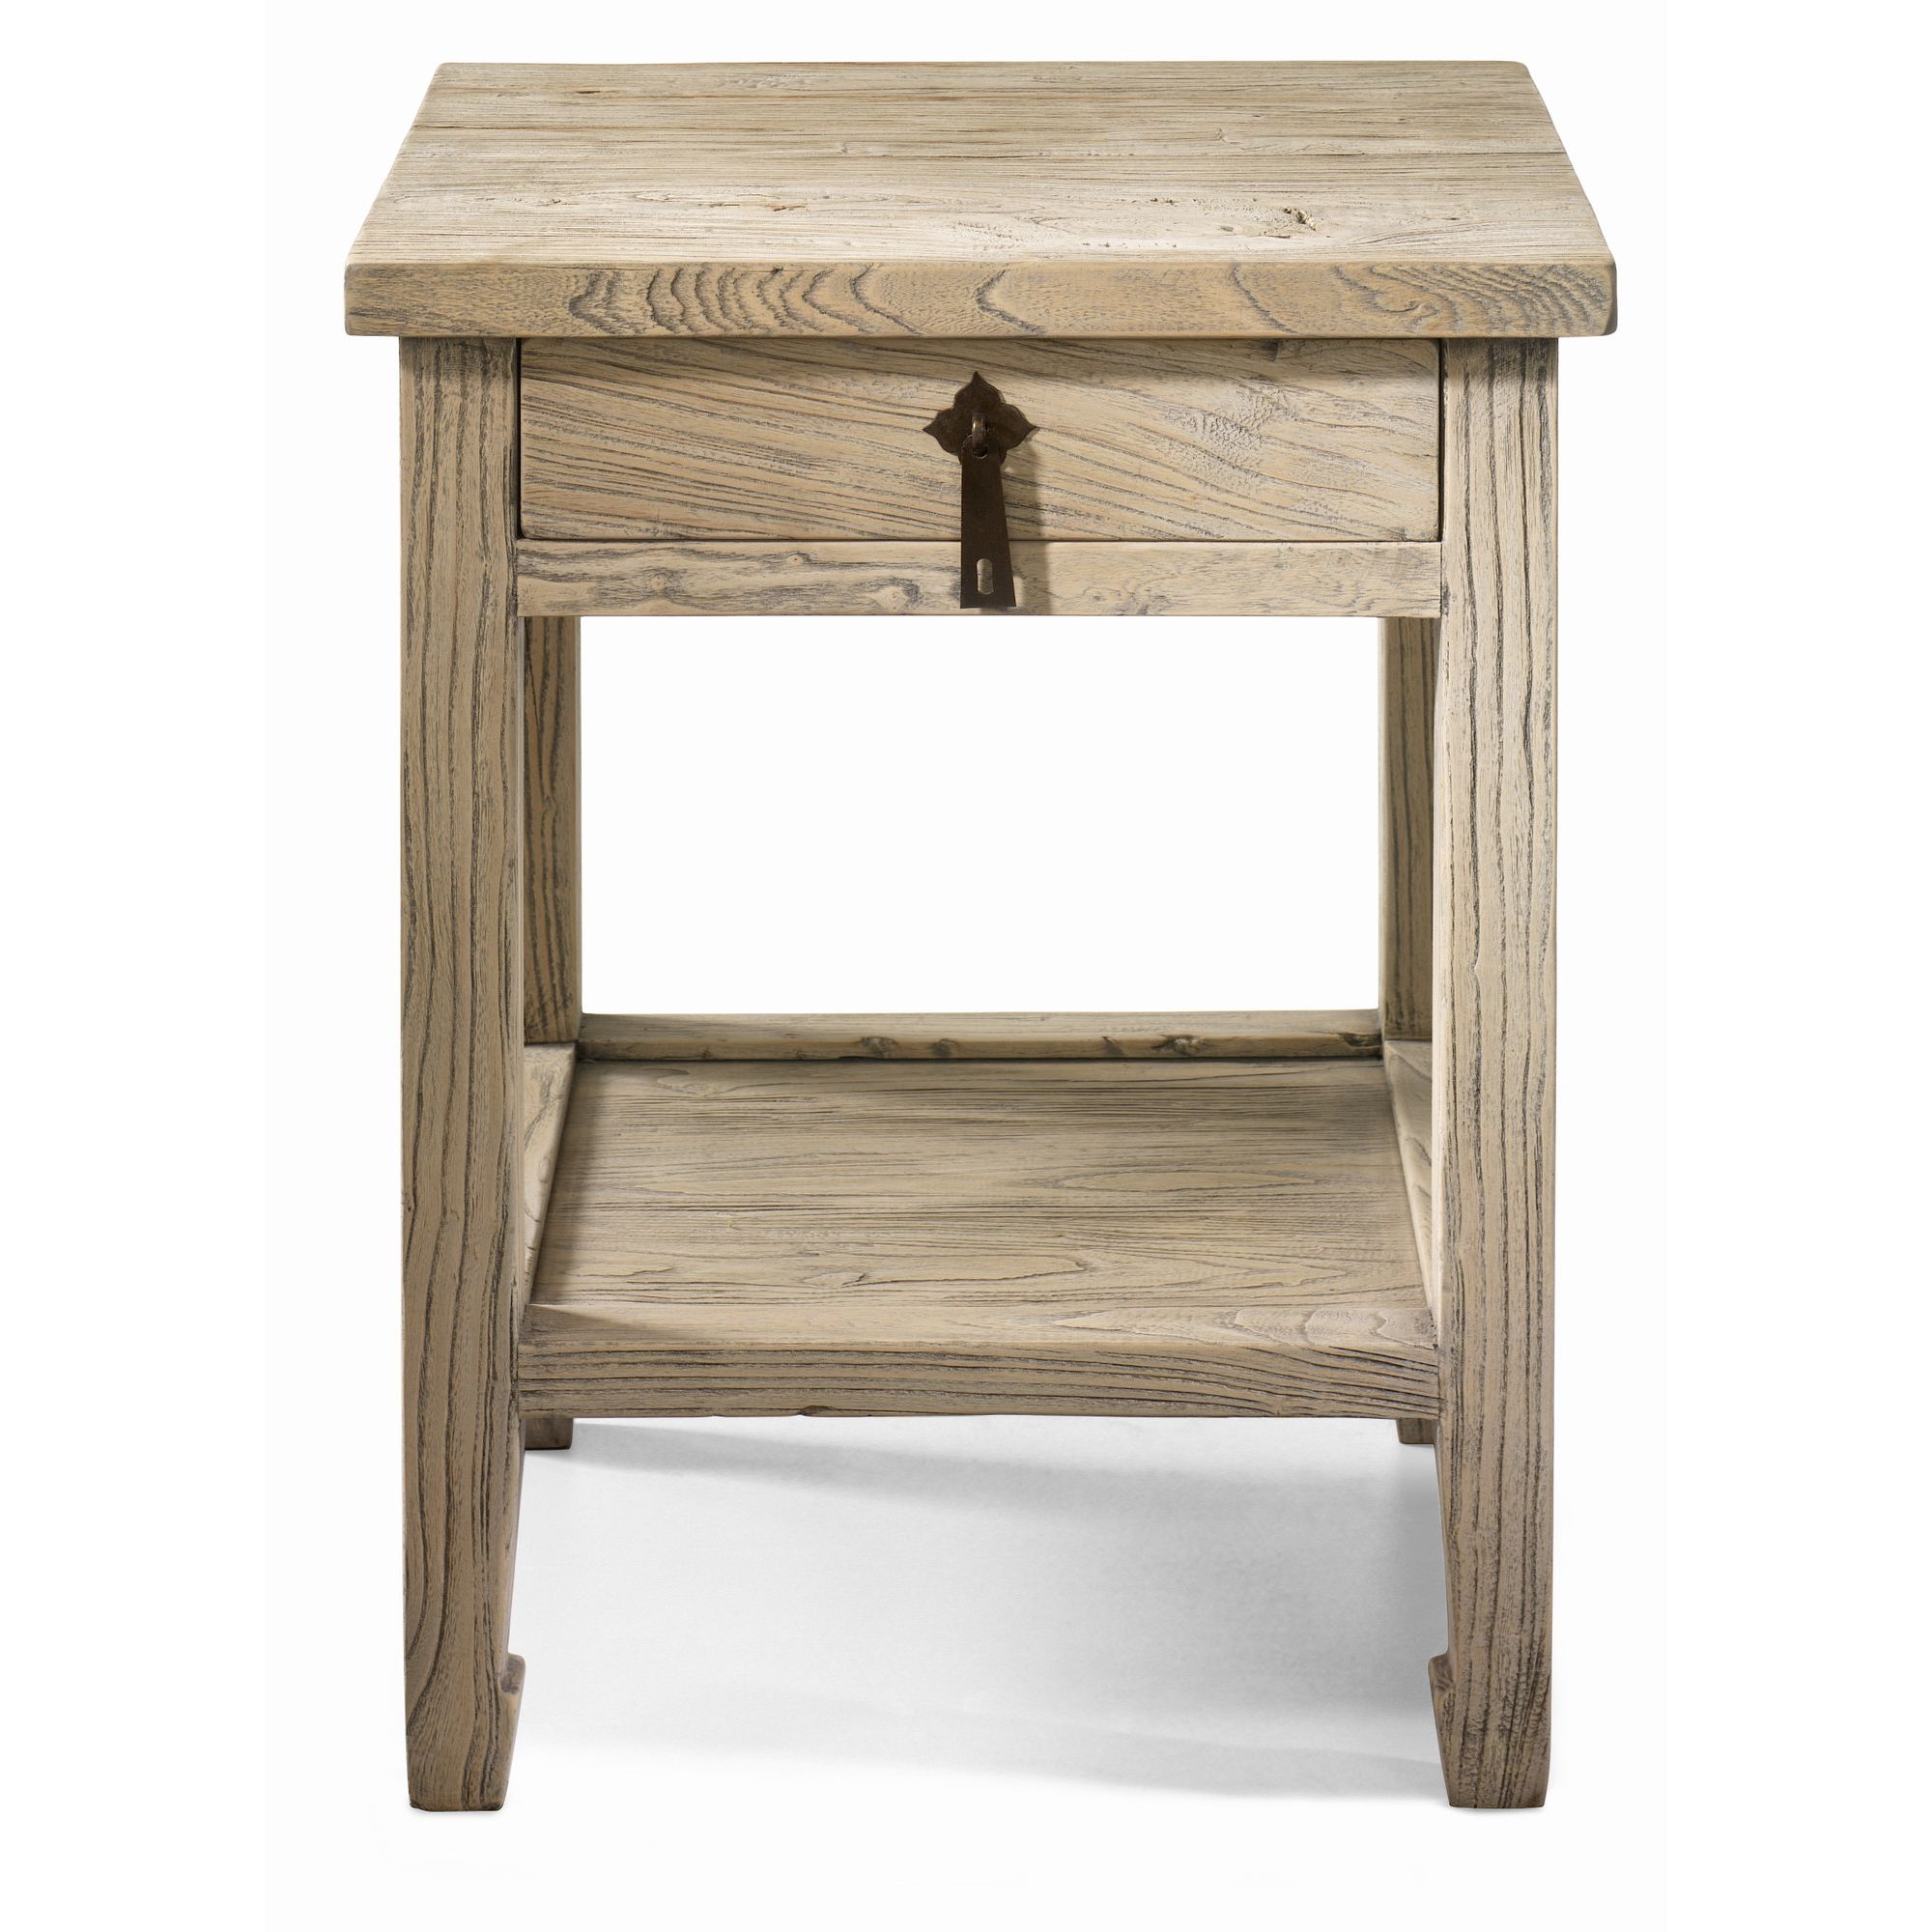 Shimu Chinese Country Furniture Side Table at Tesco Direct